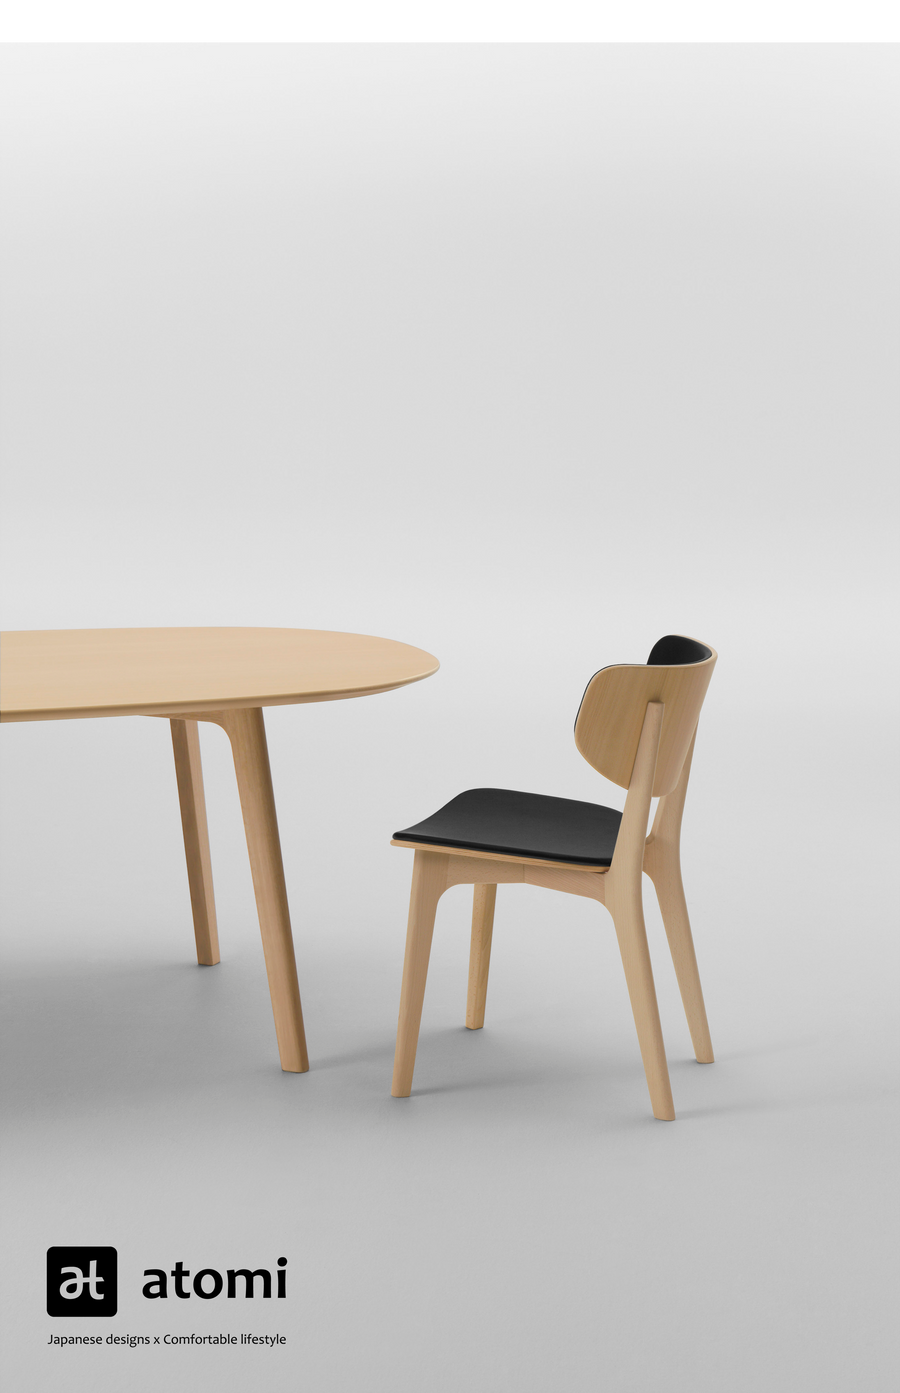 Roundish Dining Table - atomi shop